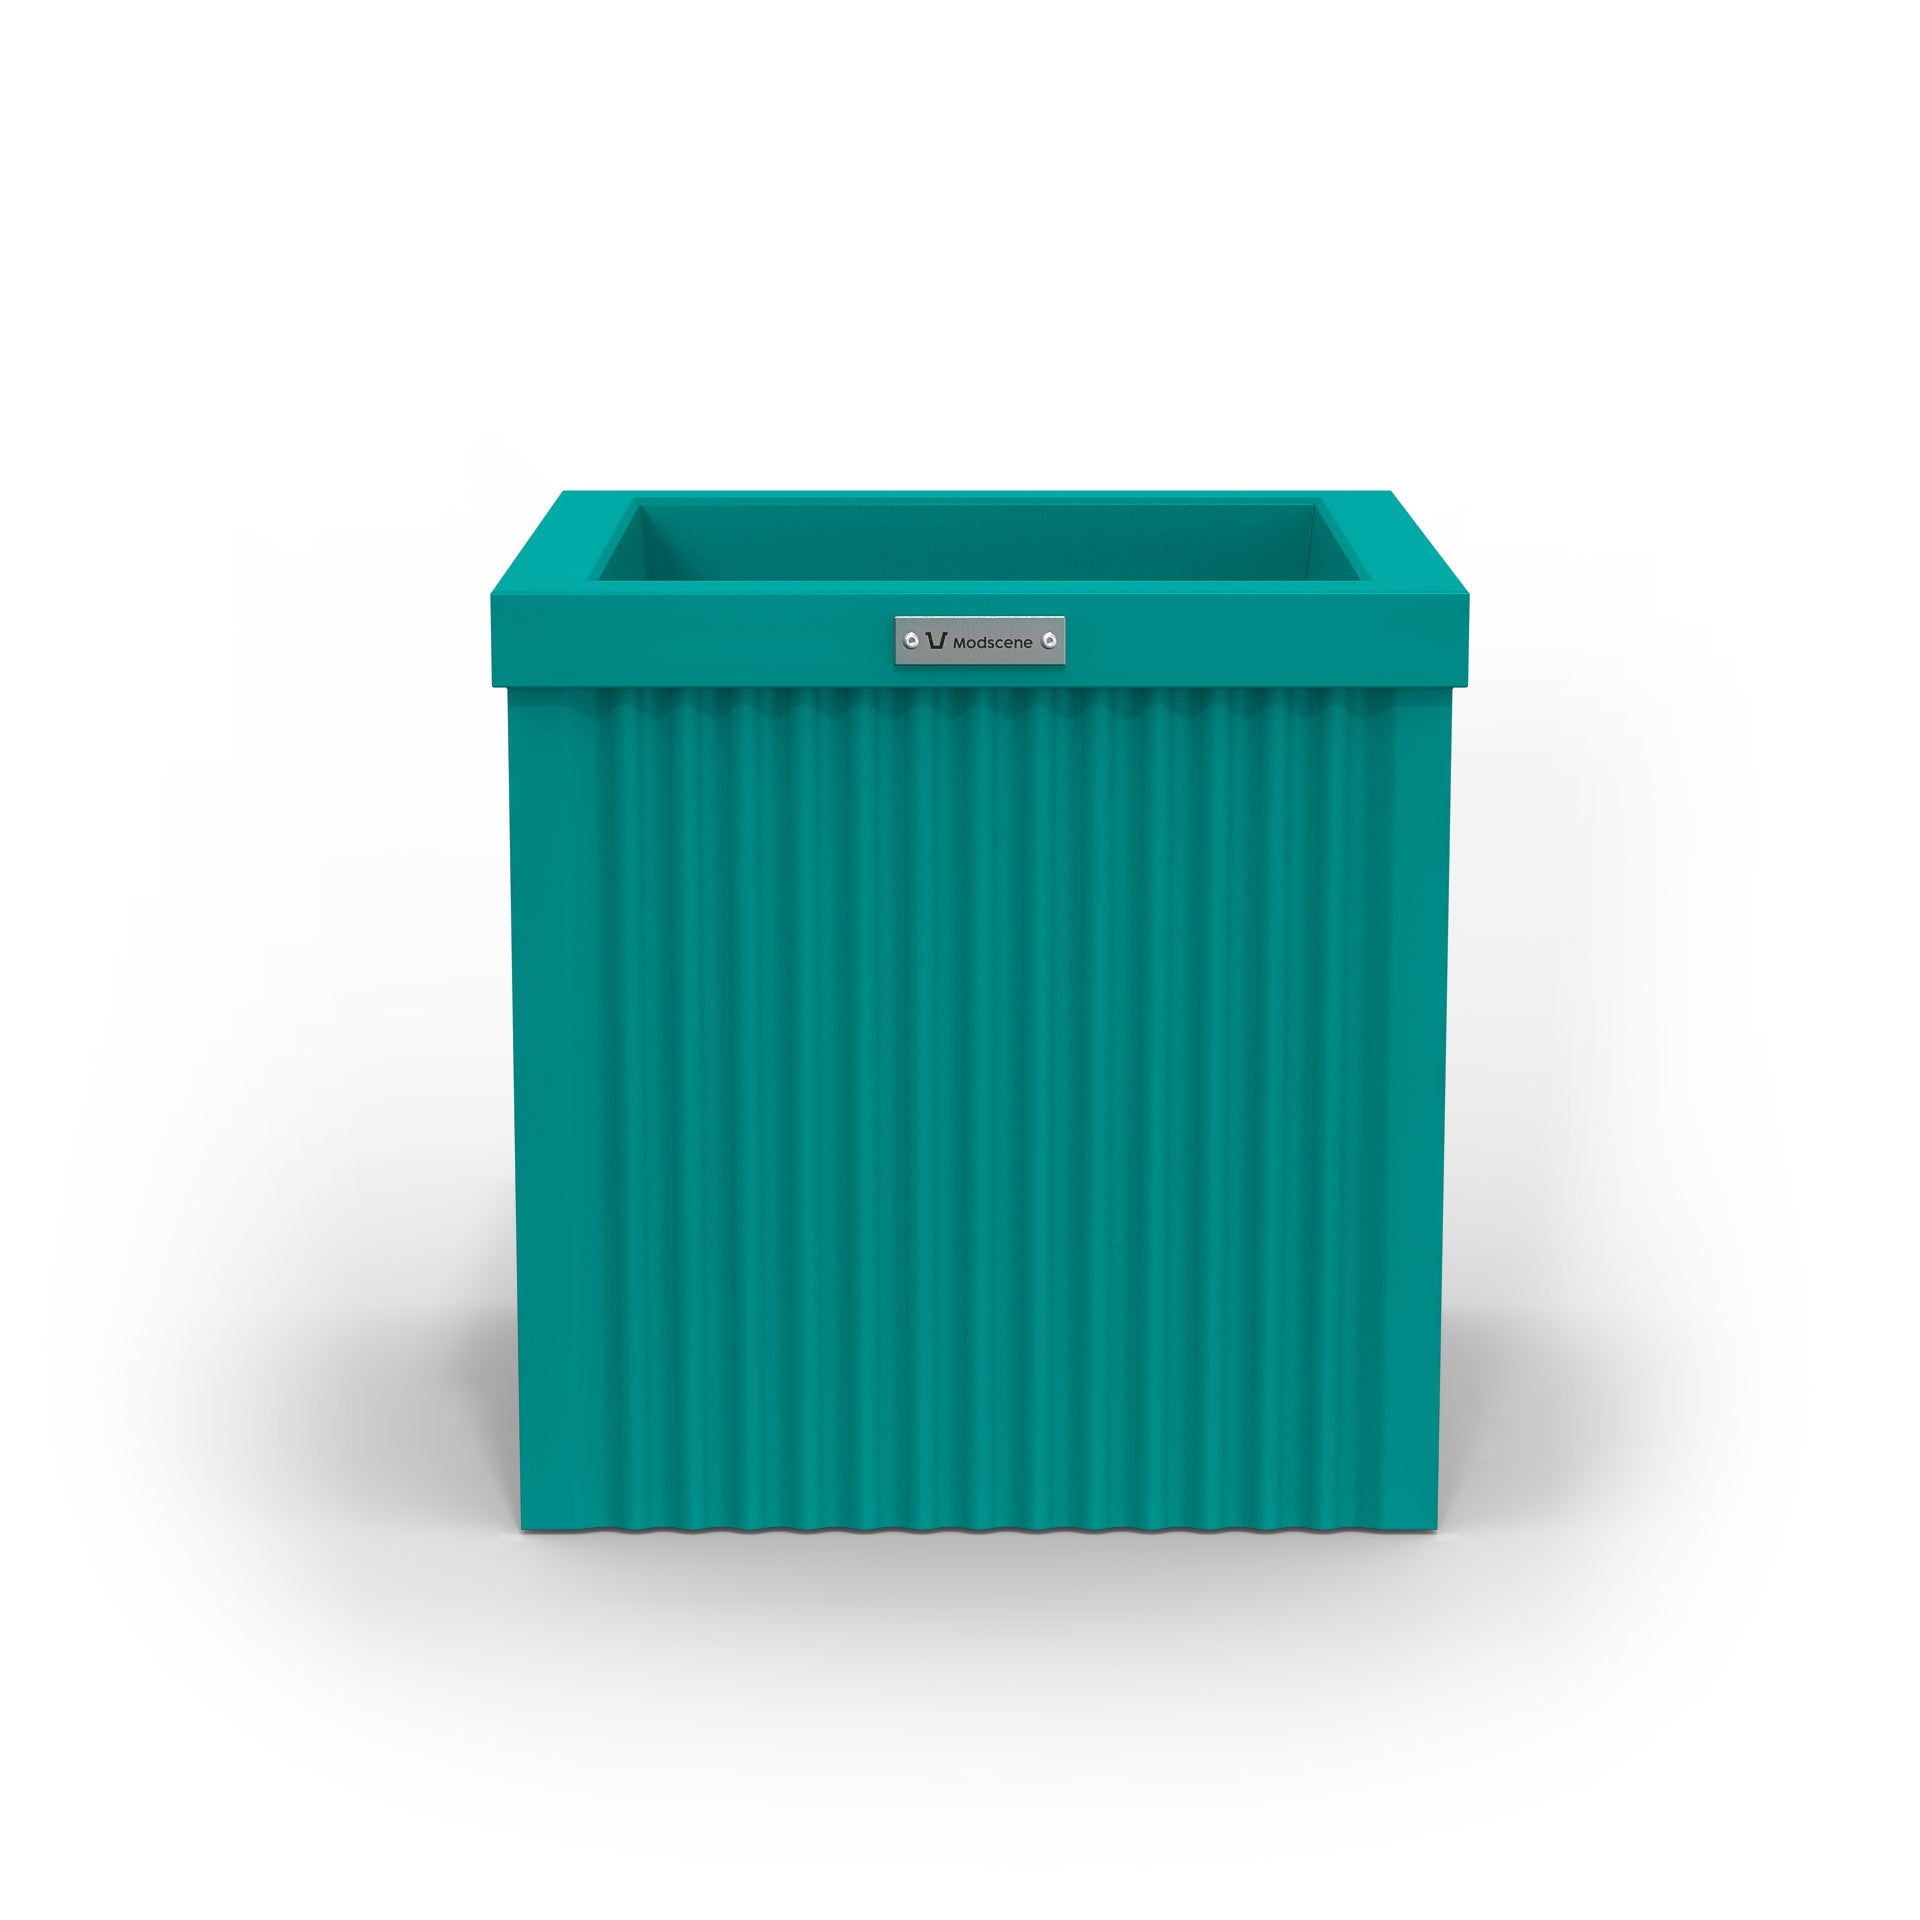 A corrugated square planter pot. The pot planter is teal in colour.